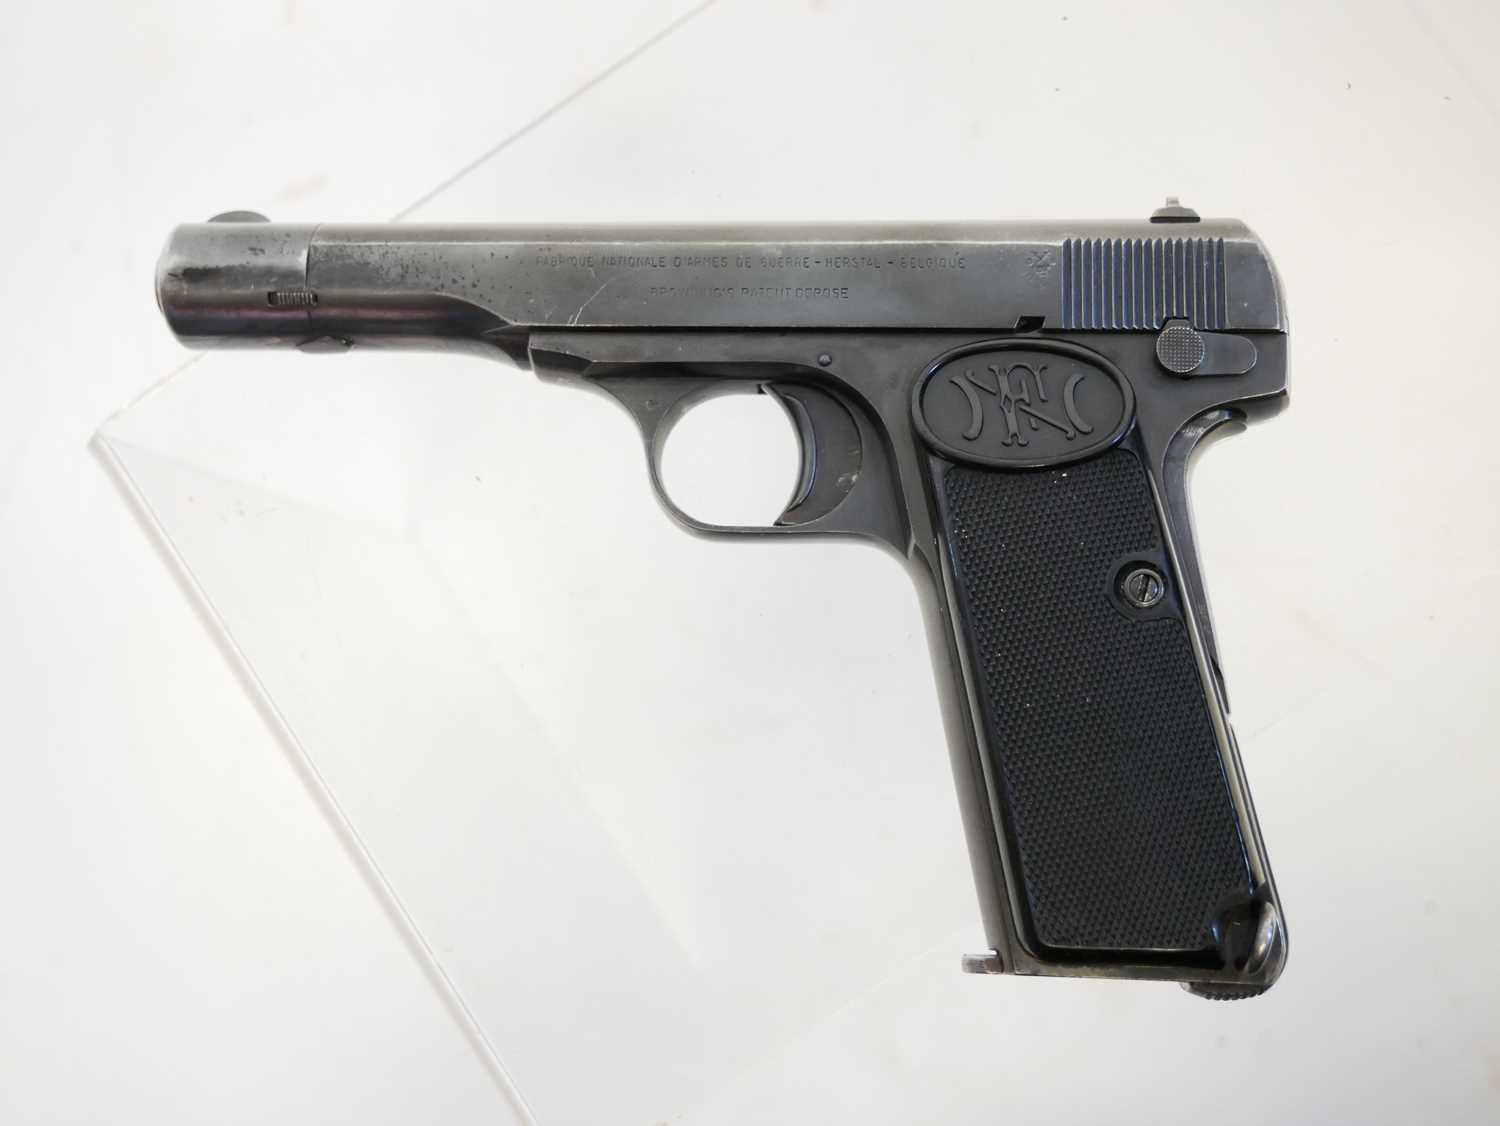 Deactivated FN Browning 1922 semi automatic pistol - Image 5 of 7